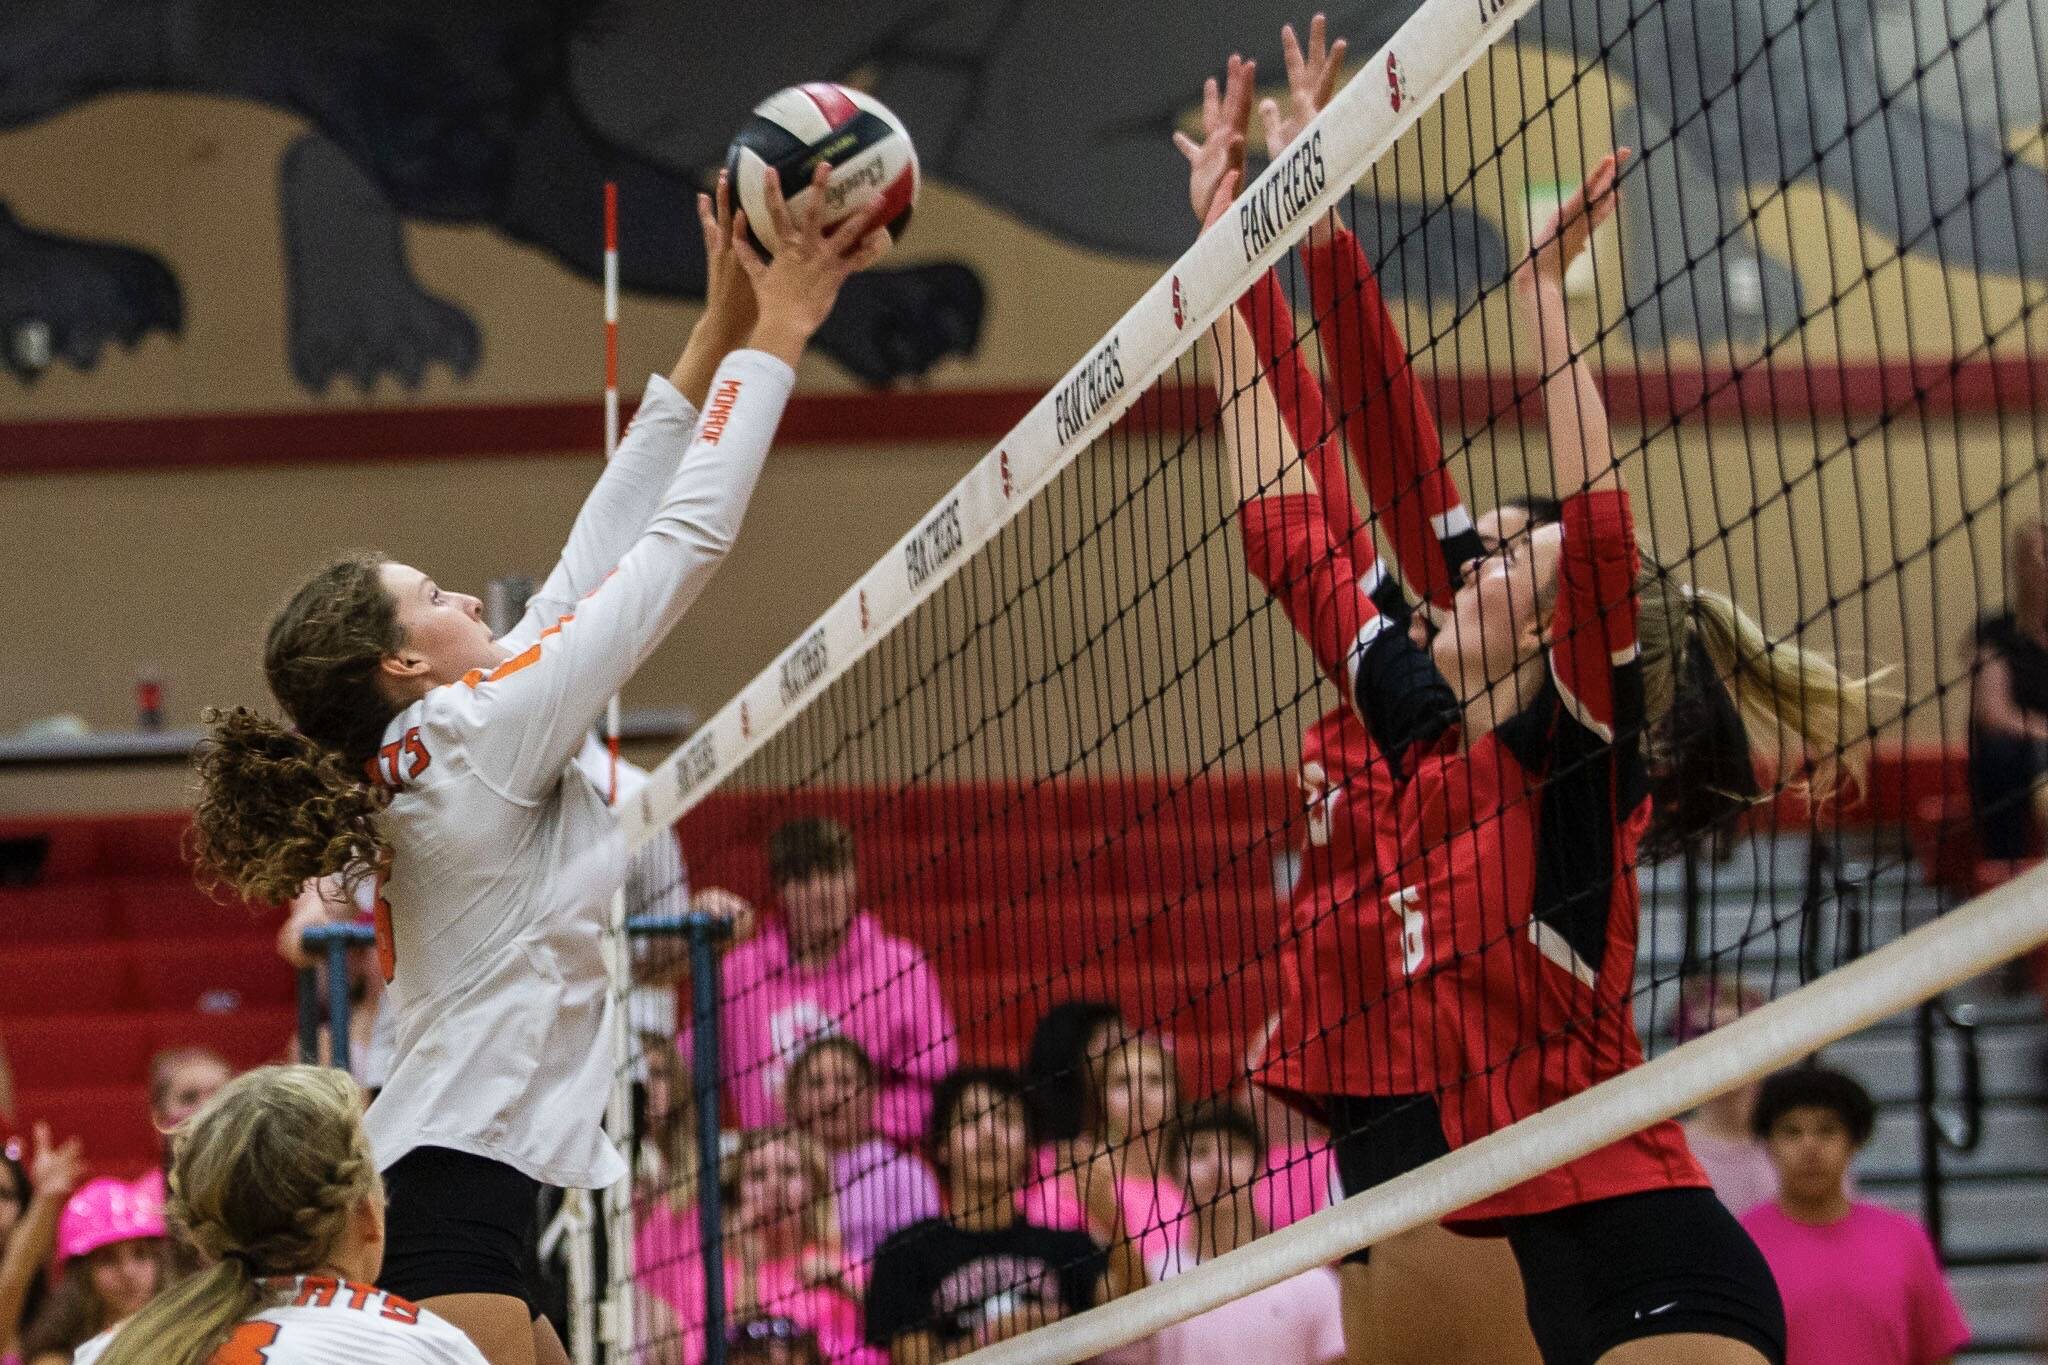 Monroe’s Jessi Mahler sets the ball over the net during the match against Snohomish on Tuesday, Sept. 27, 2022 in Snohomish, Washington. (Olivia Vanni / The Herald)